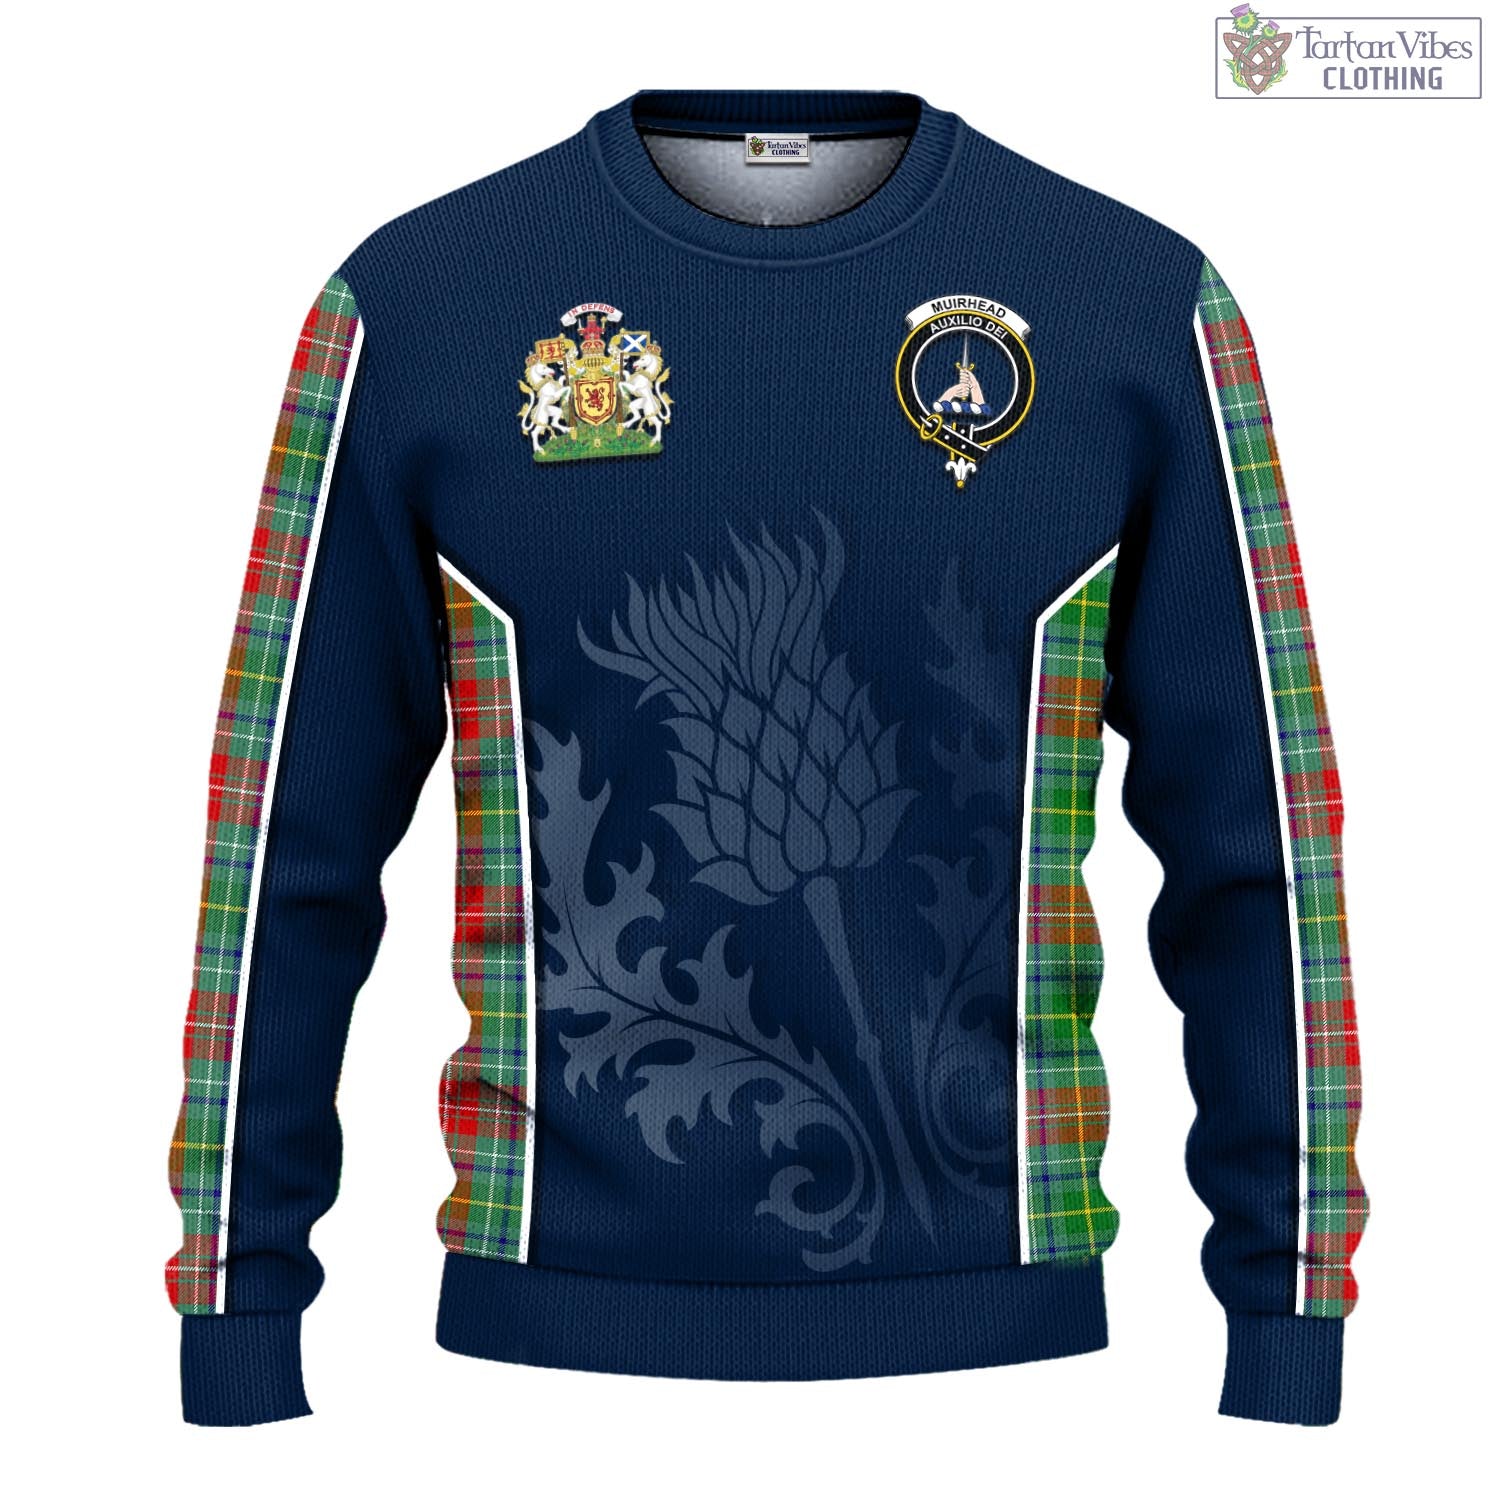 Tartan Vibes Clothing Muirhead Tartan Knitted Sweatshirt with Family Crest and Scottish Thistle Vibes Sport Style